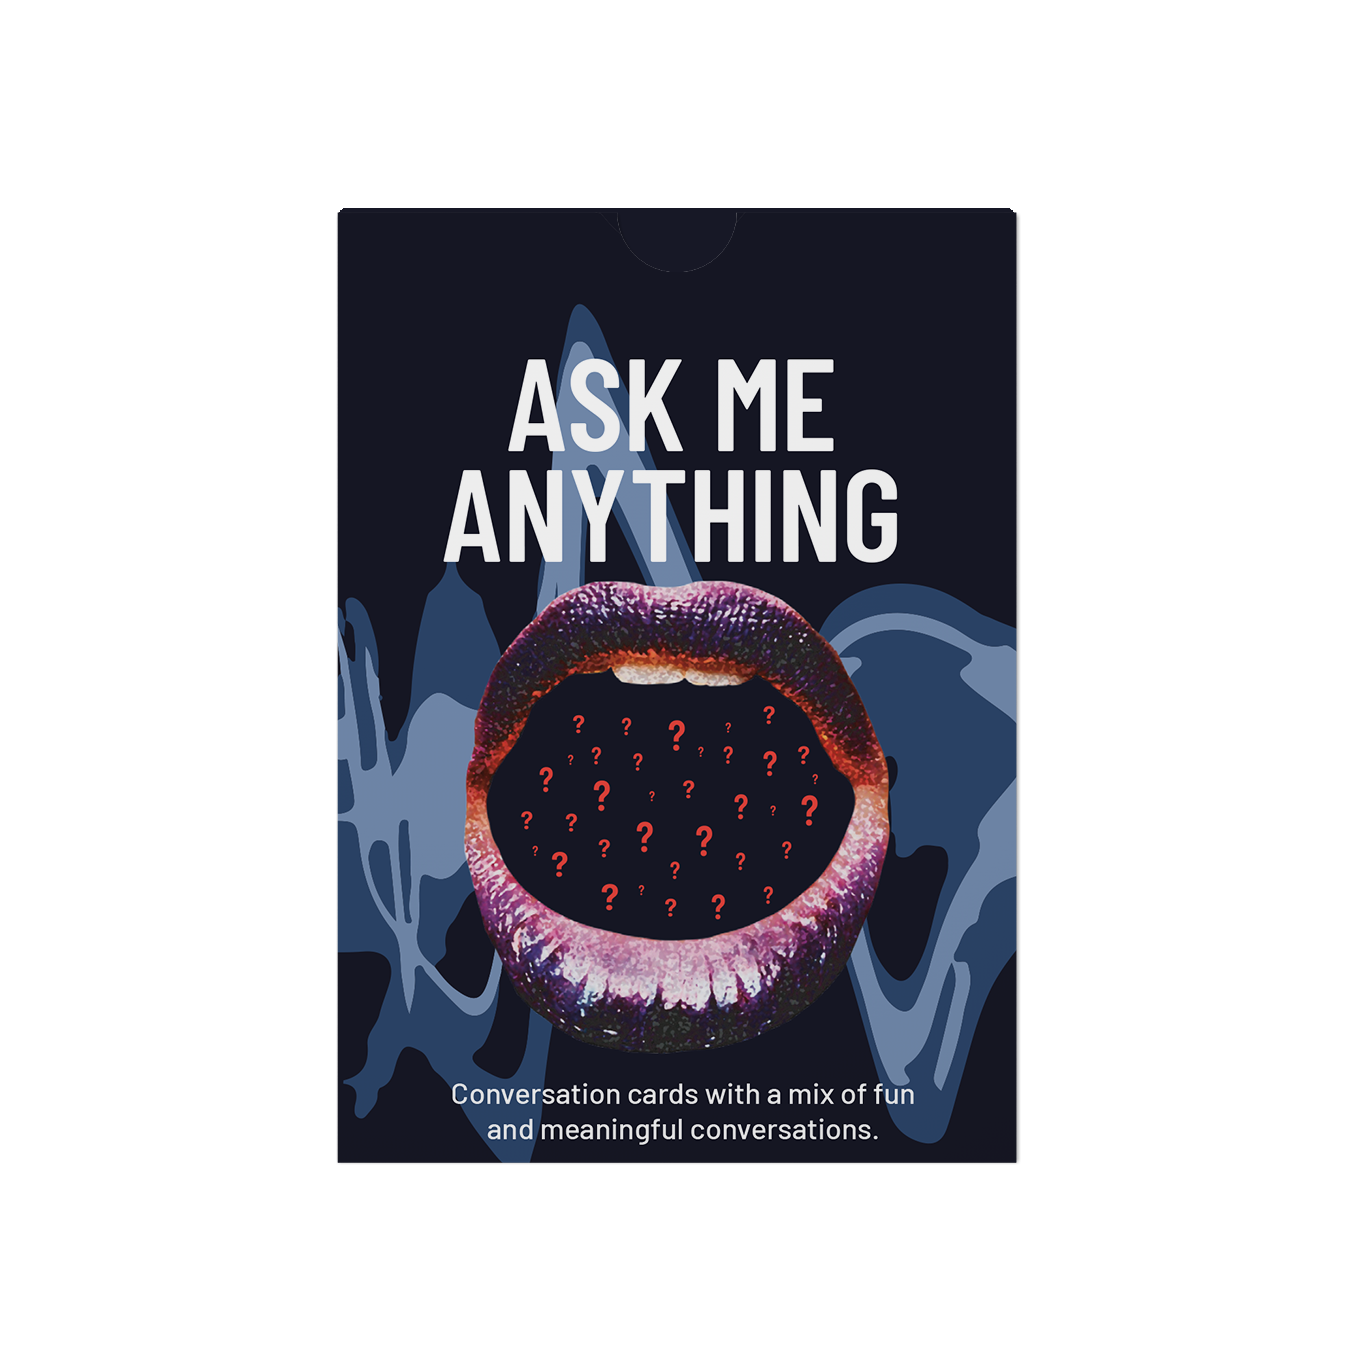 ASK me anything - Conversation cards with a mix of fun and meaningful conversations